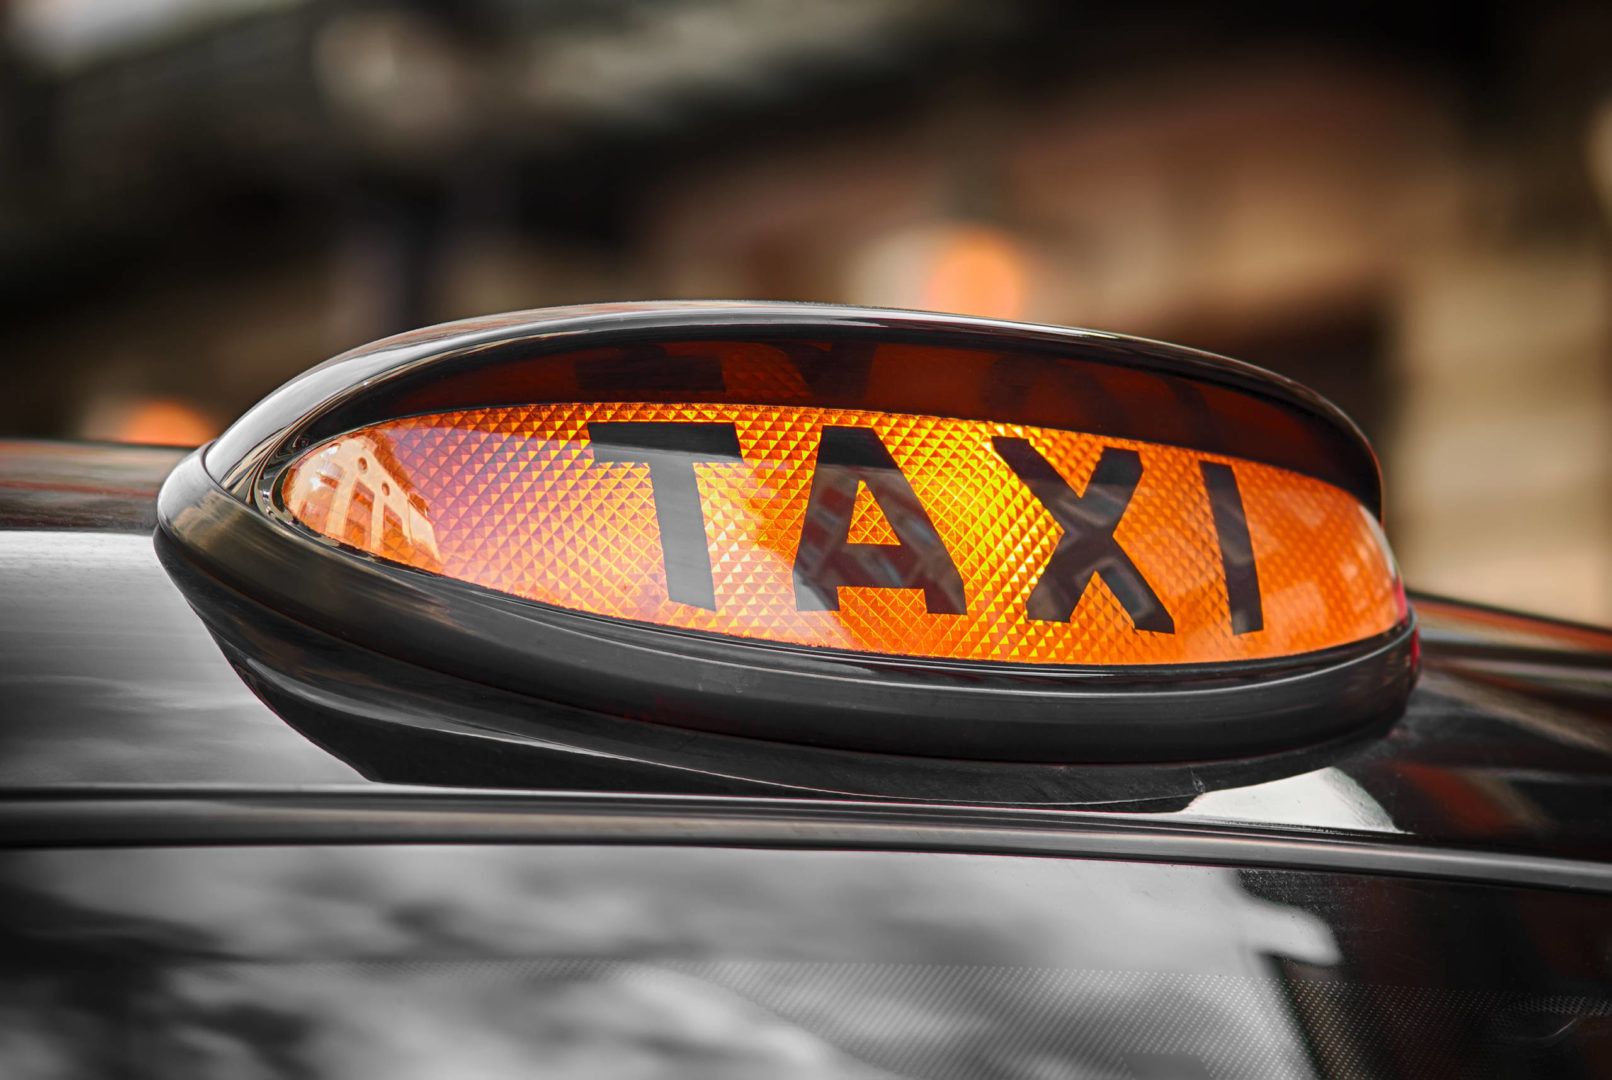 Taxi Sign